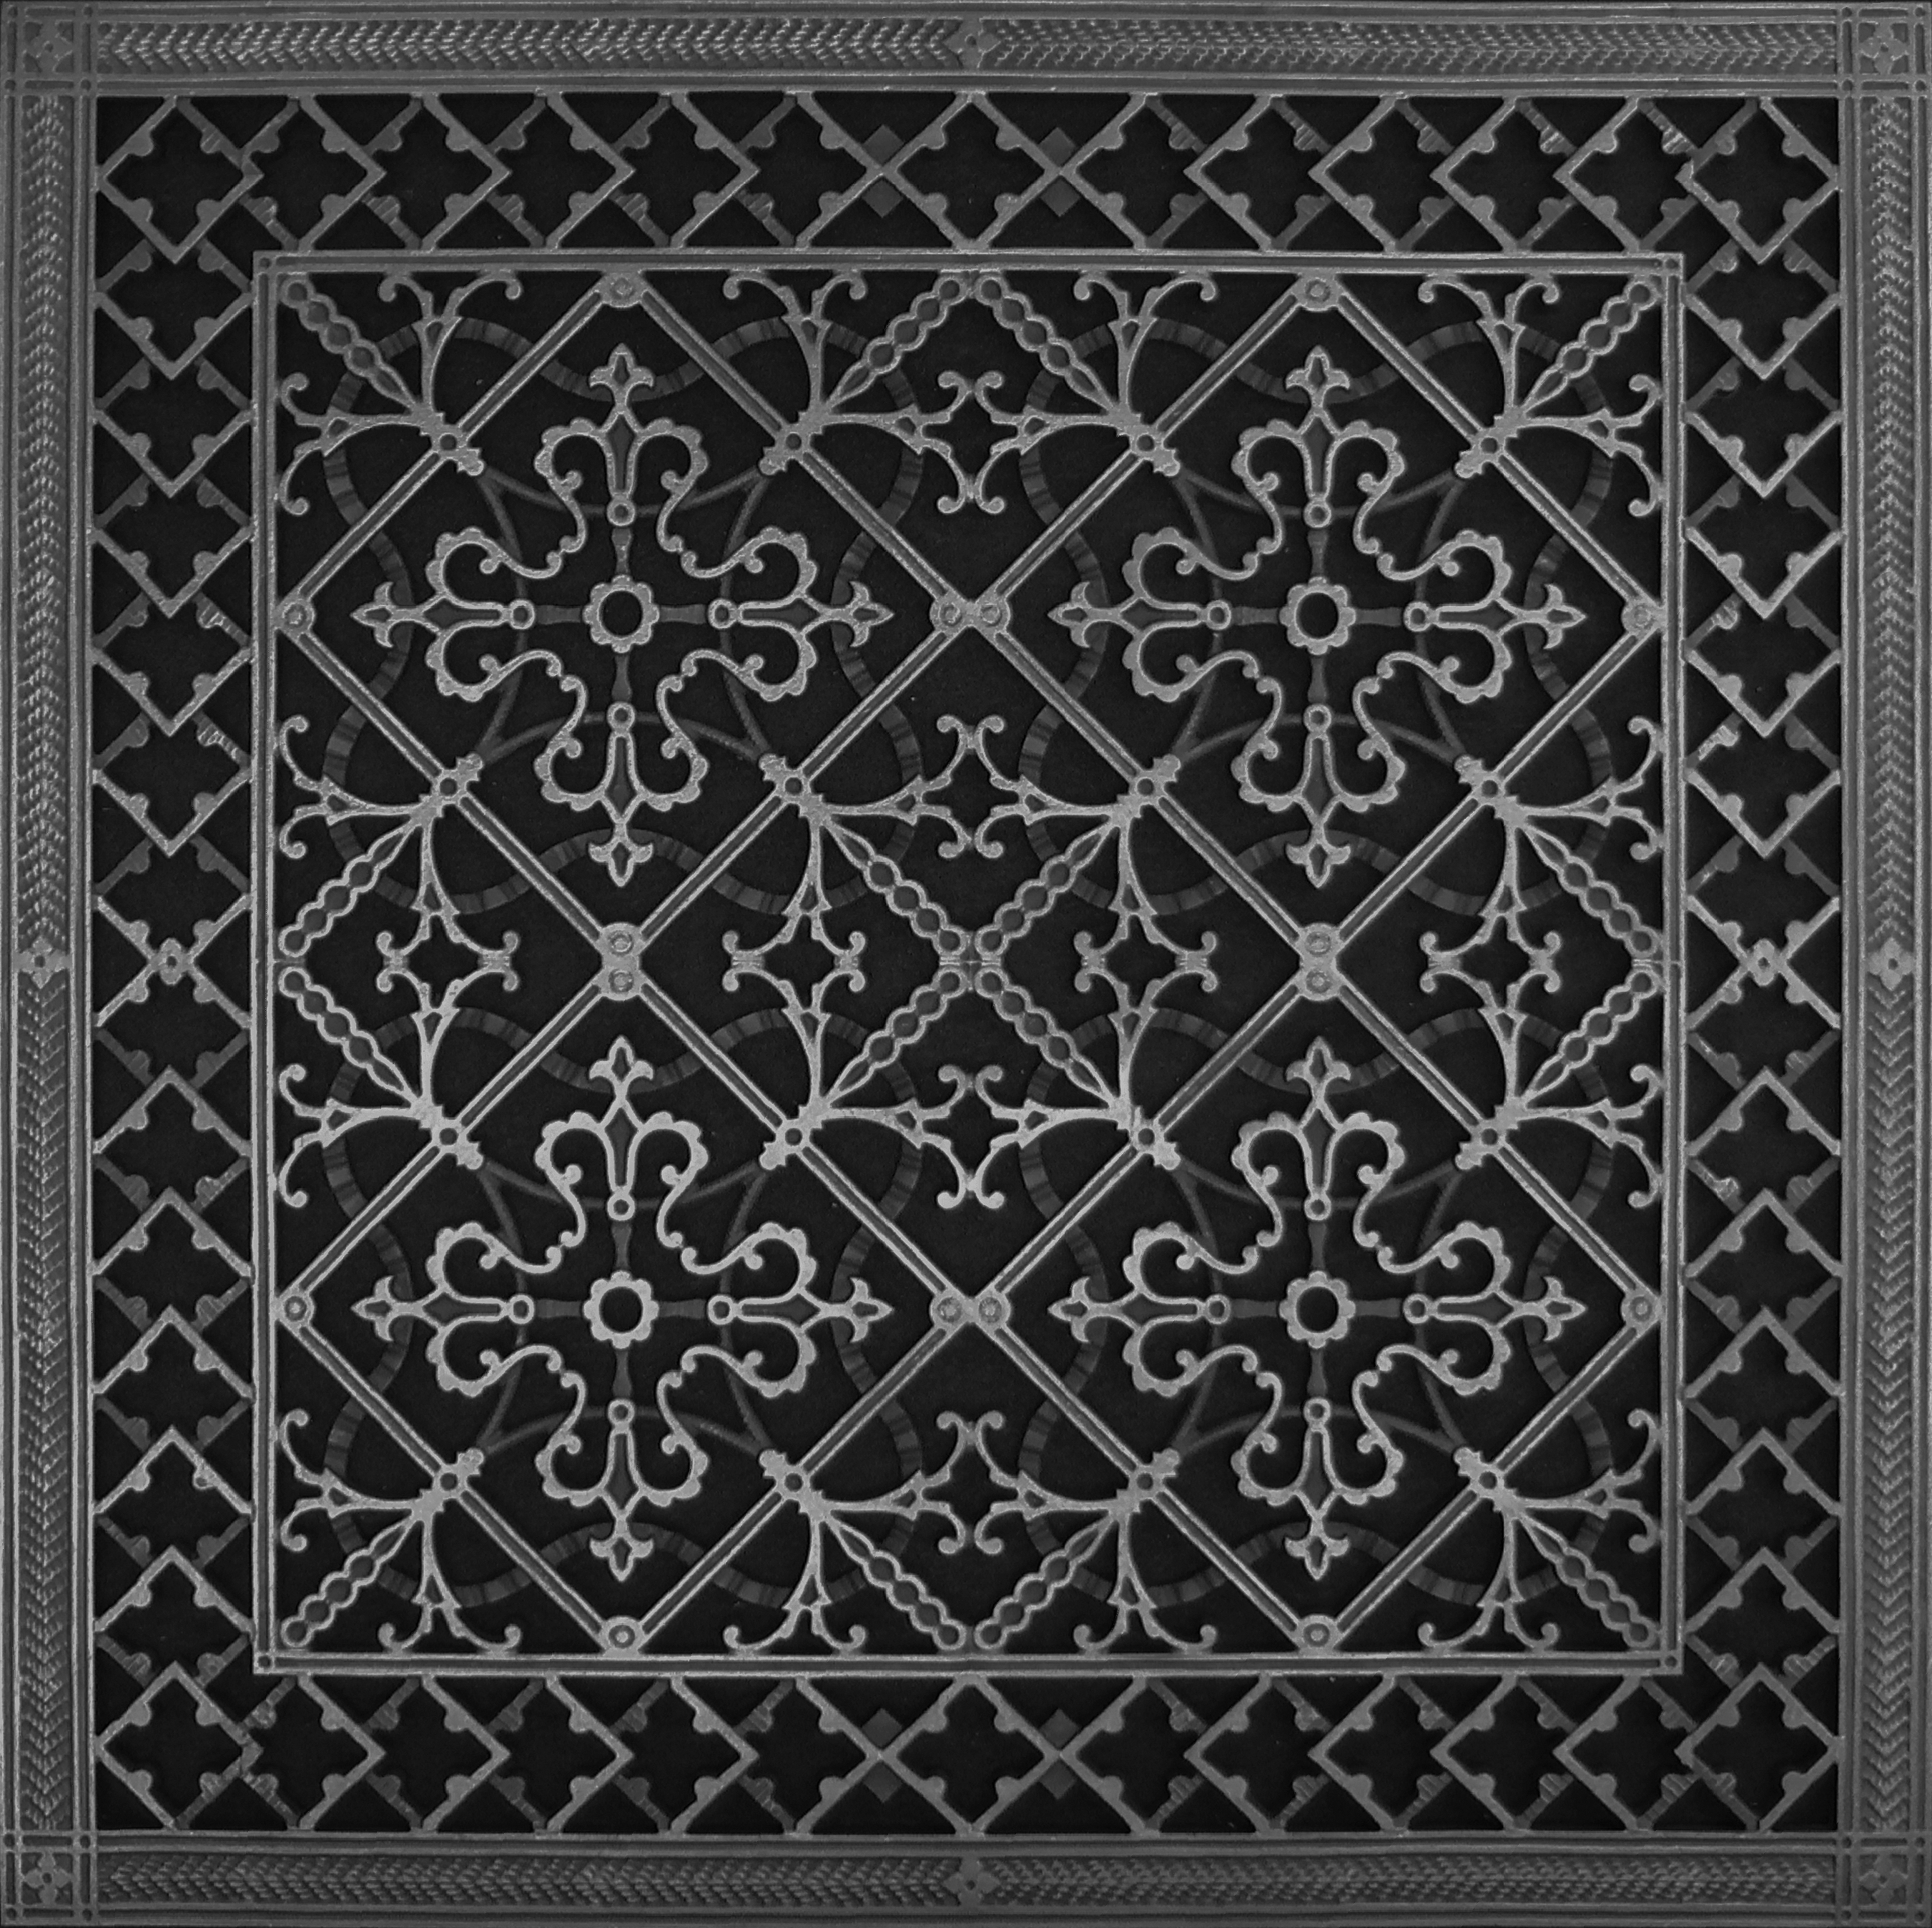 Arts and Crafts decorative grille 24" x 24" in Black